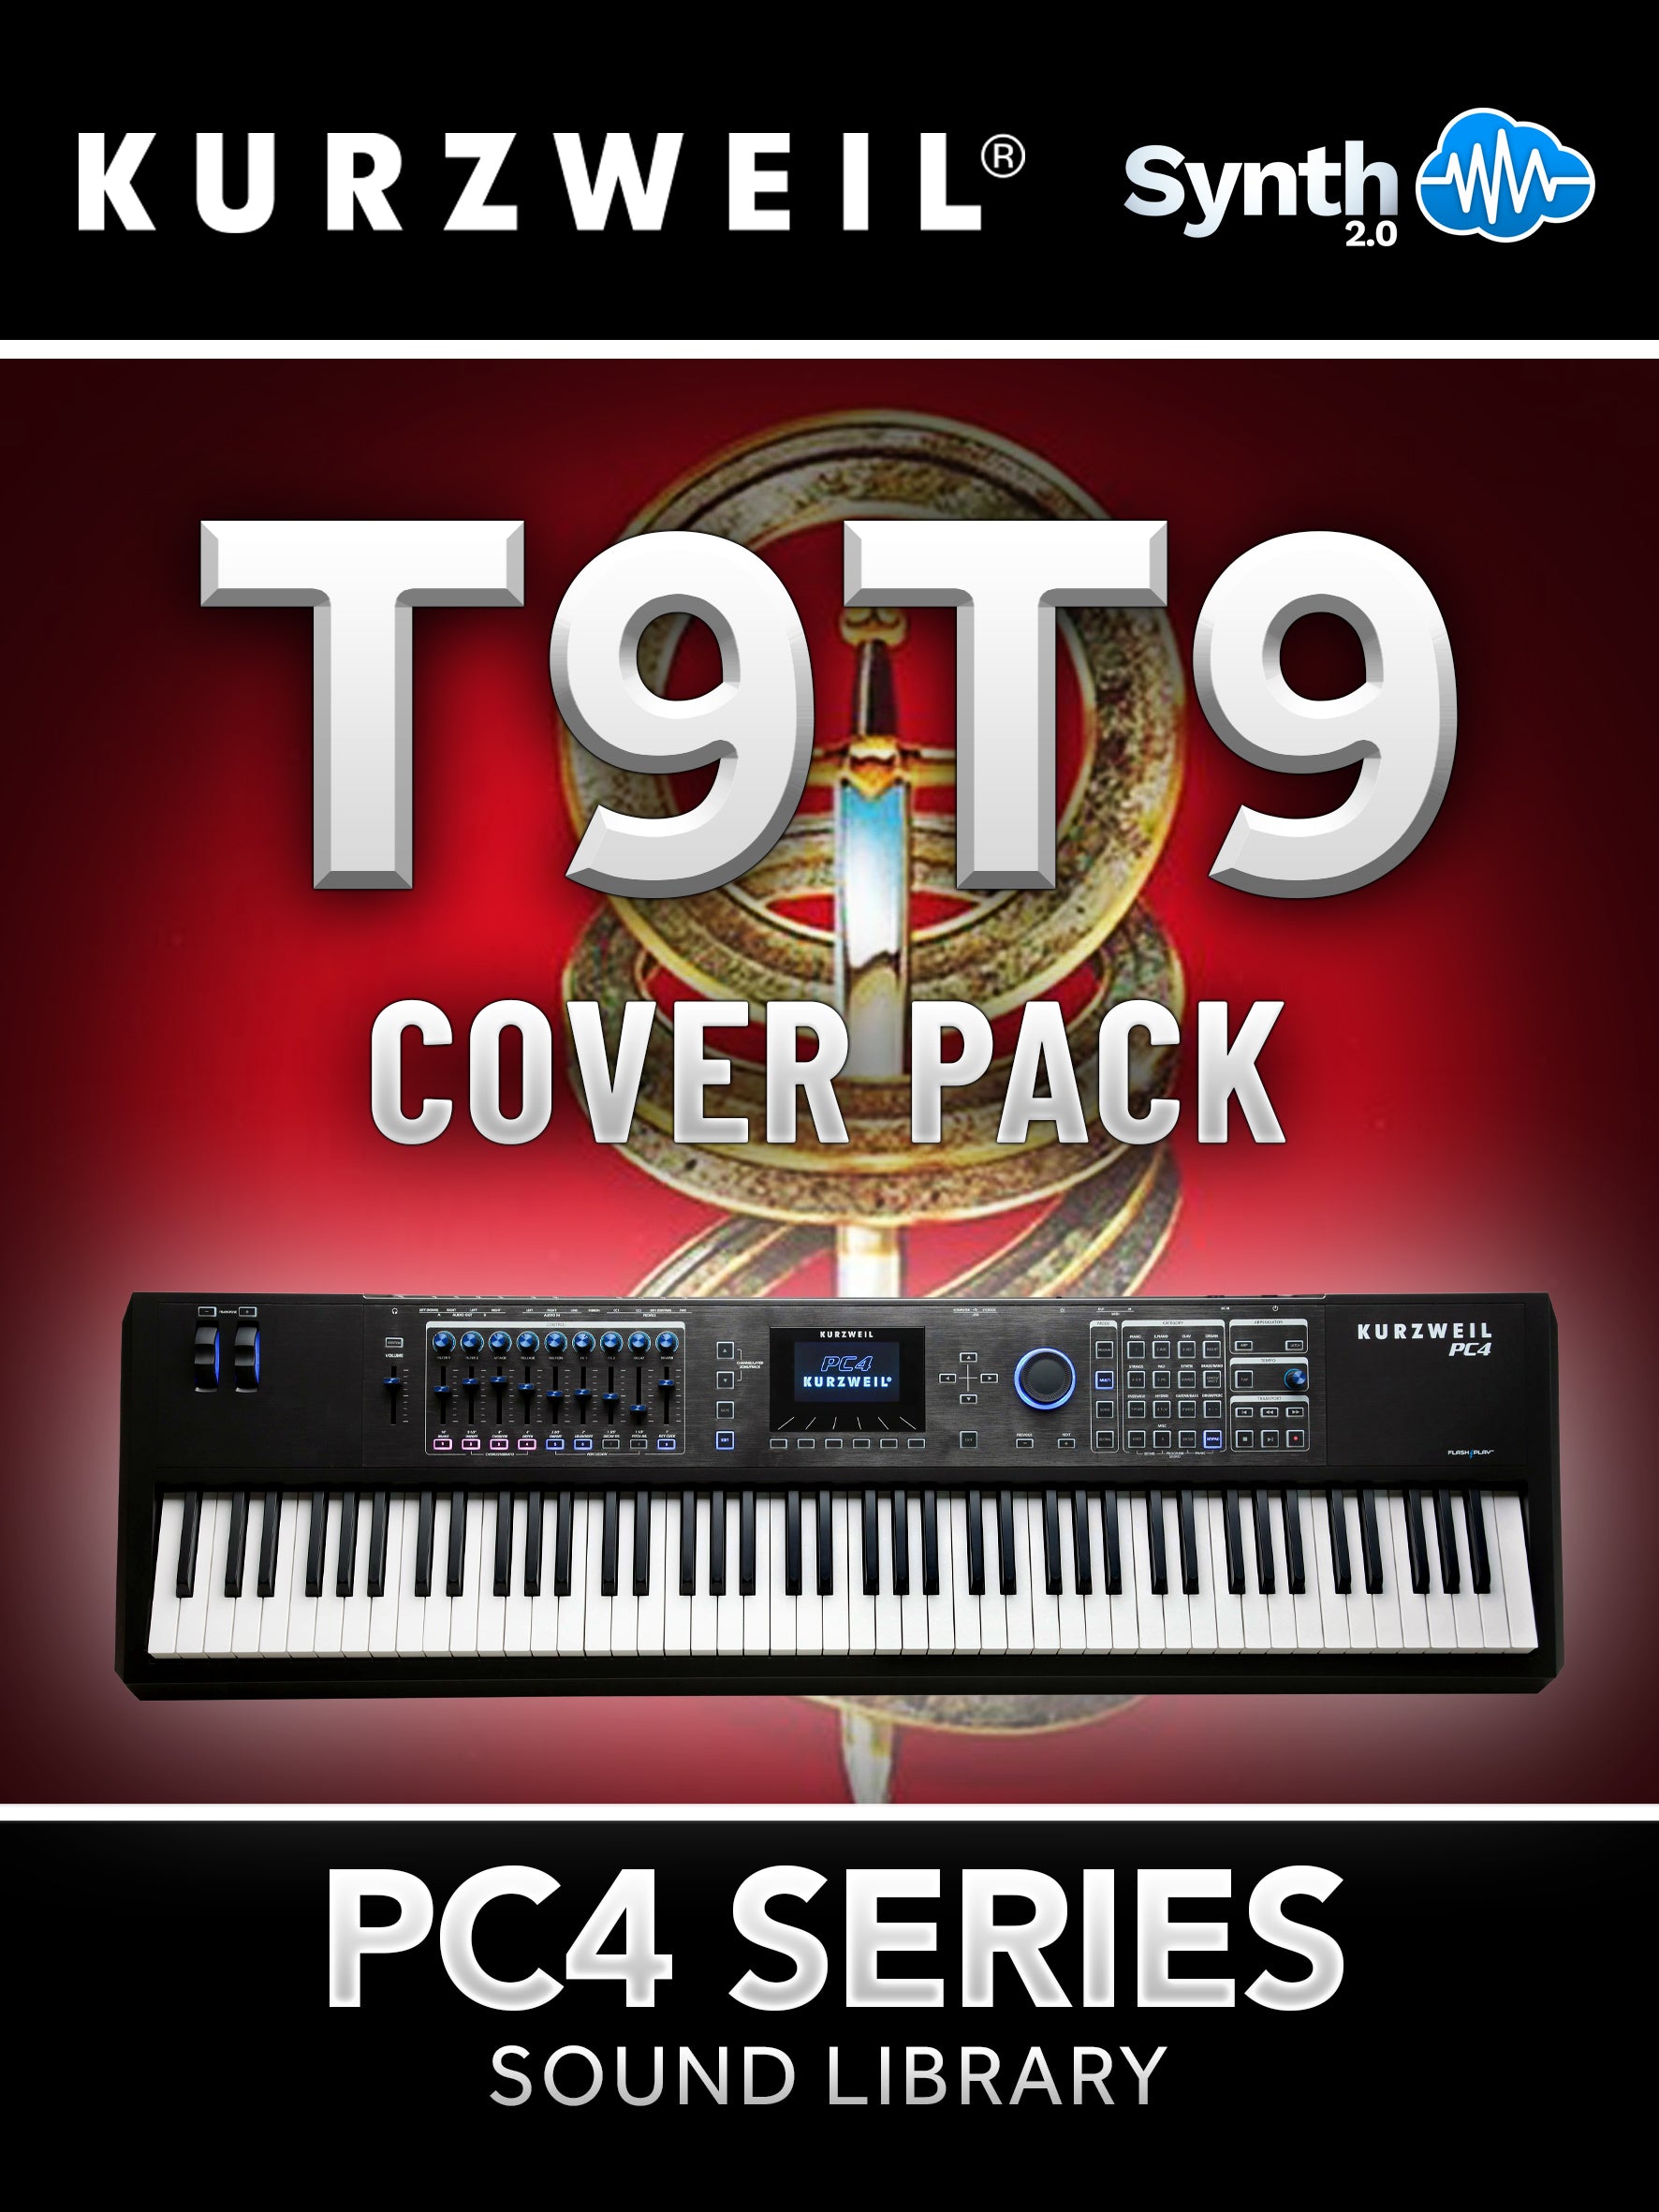 PC4009 - T9T9 Cover Pack - Kurzweil PC4 Series ( 22 presets )